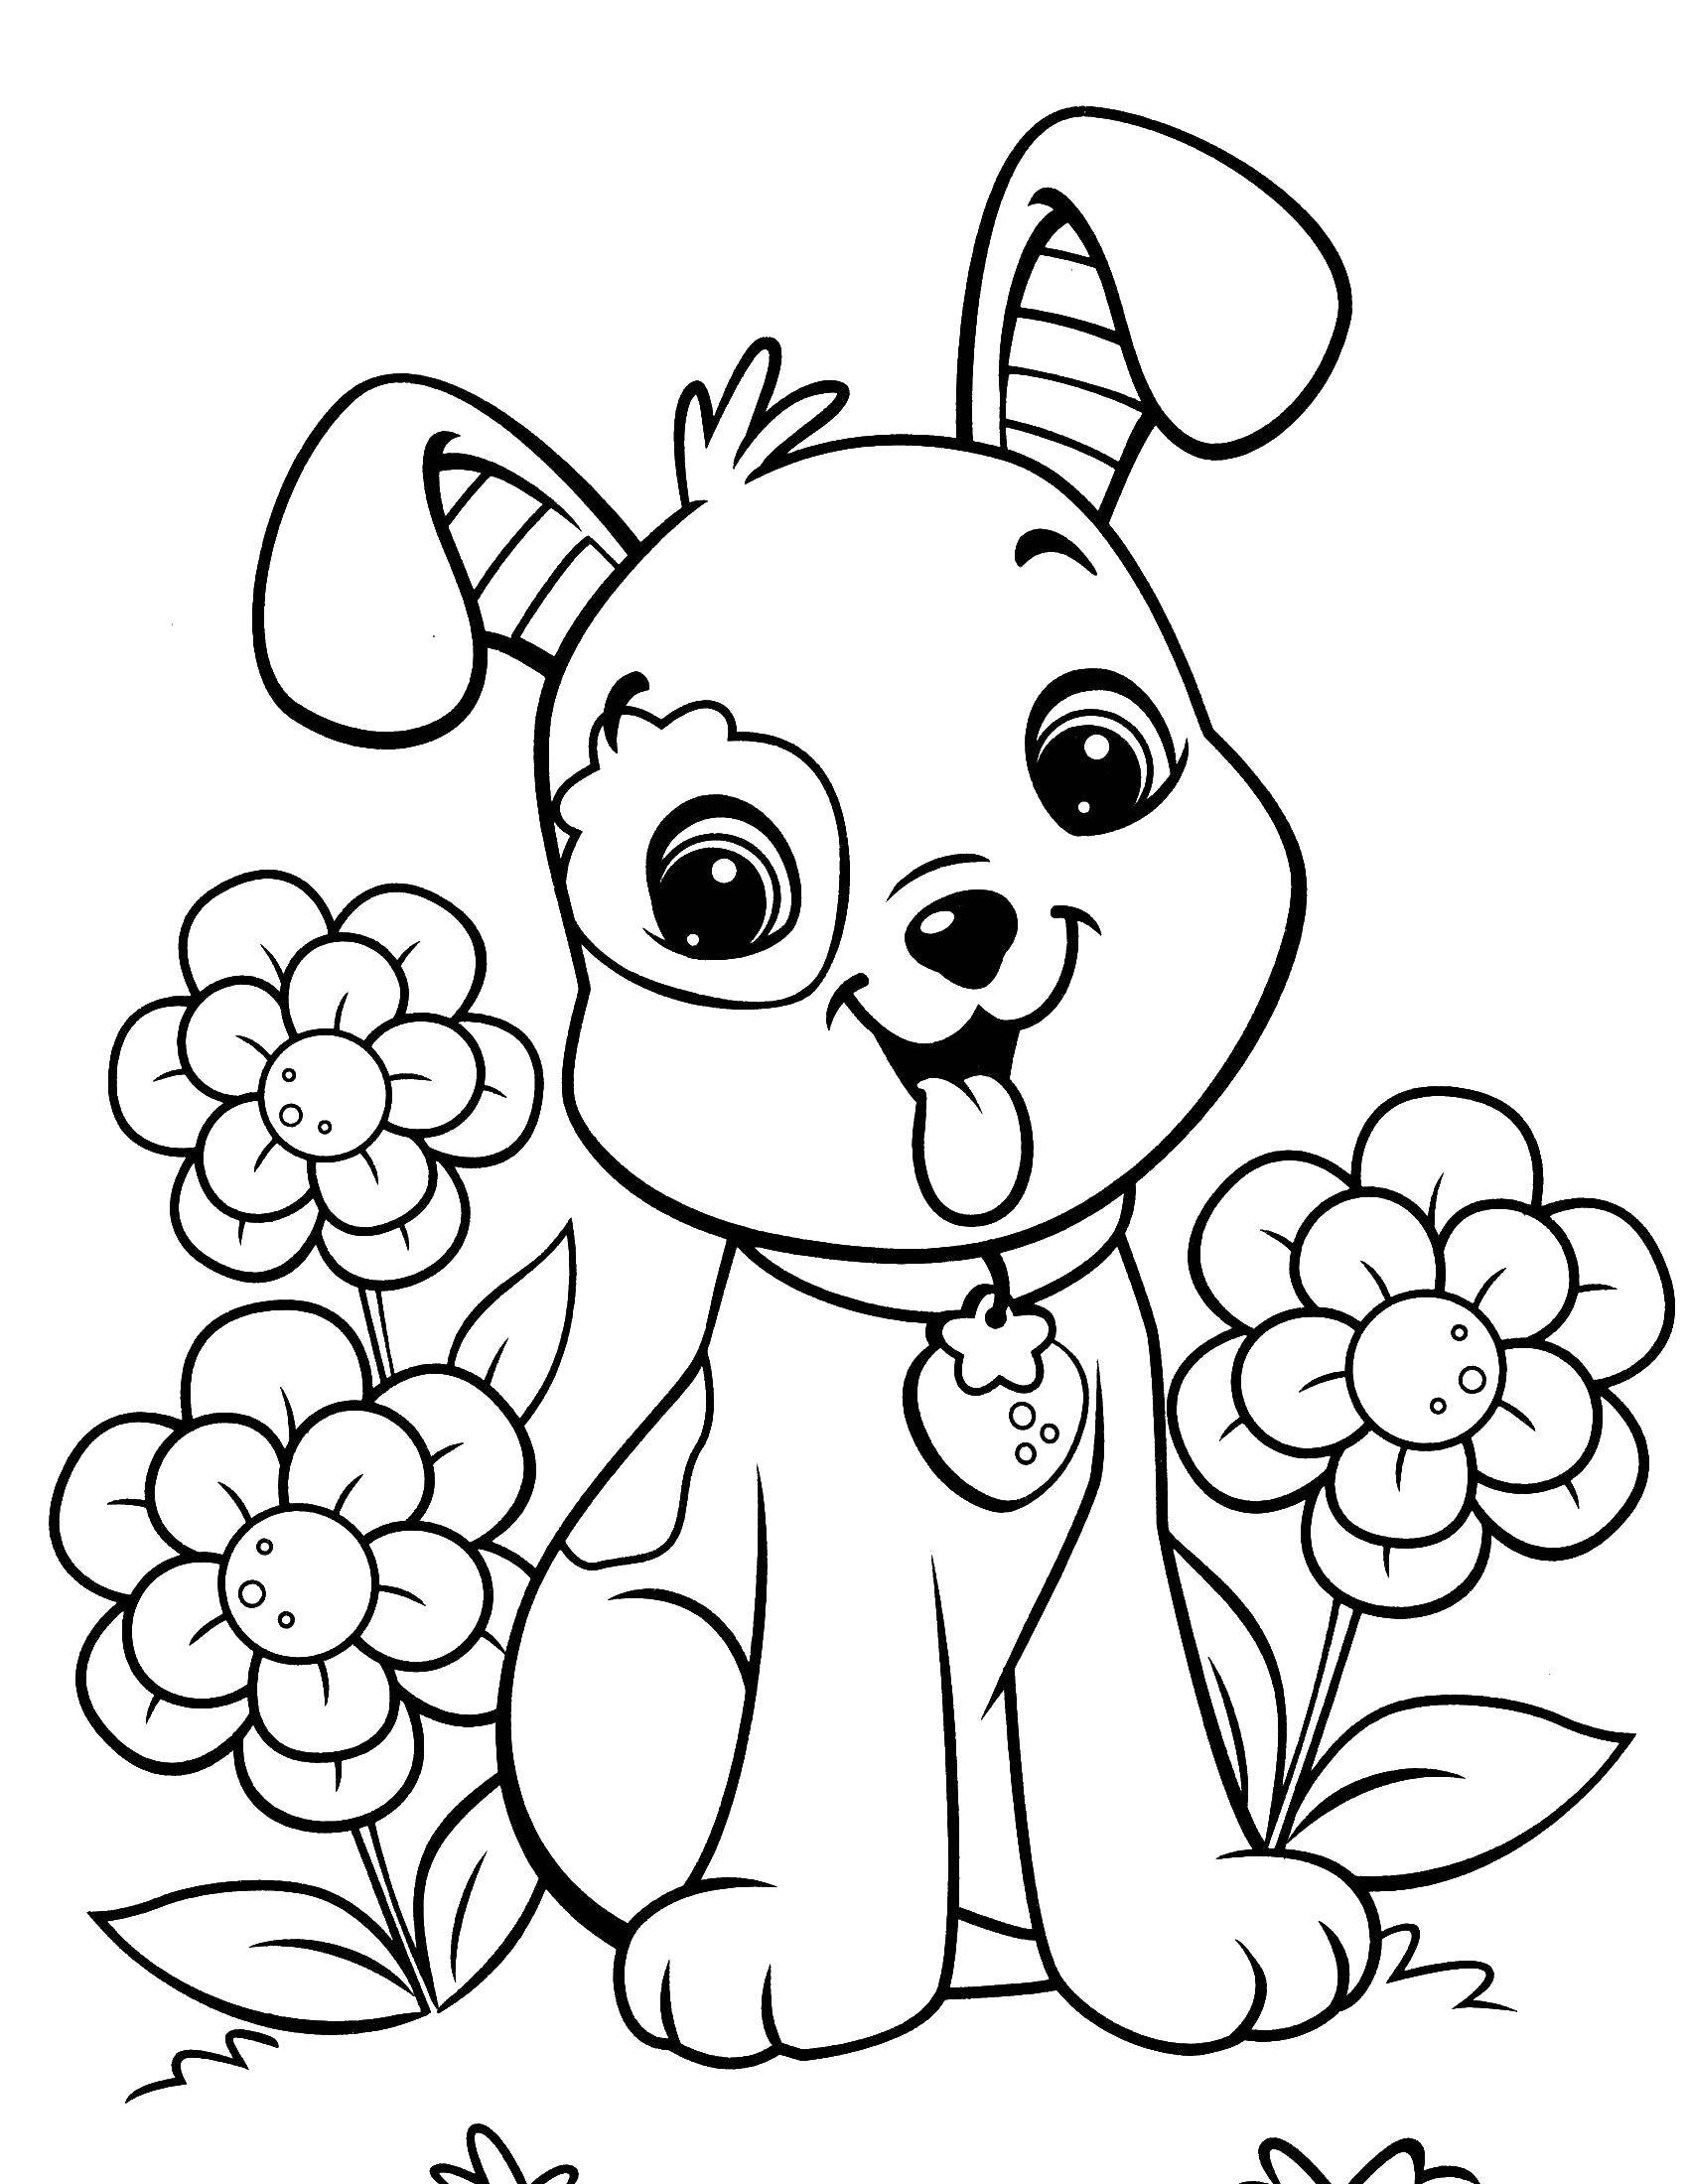 Coloring Puppy and flowers. Category dogs. Tags:  puppy, dog, flowers.